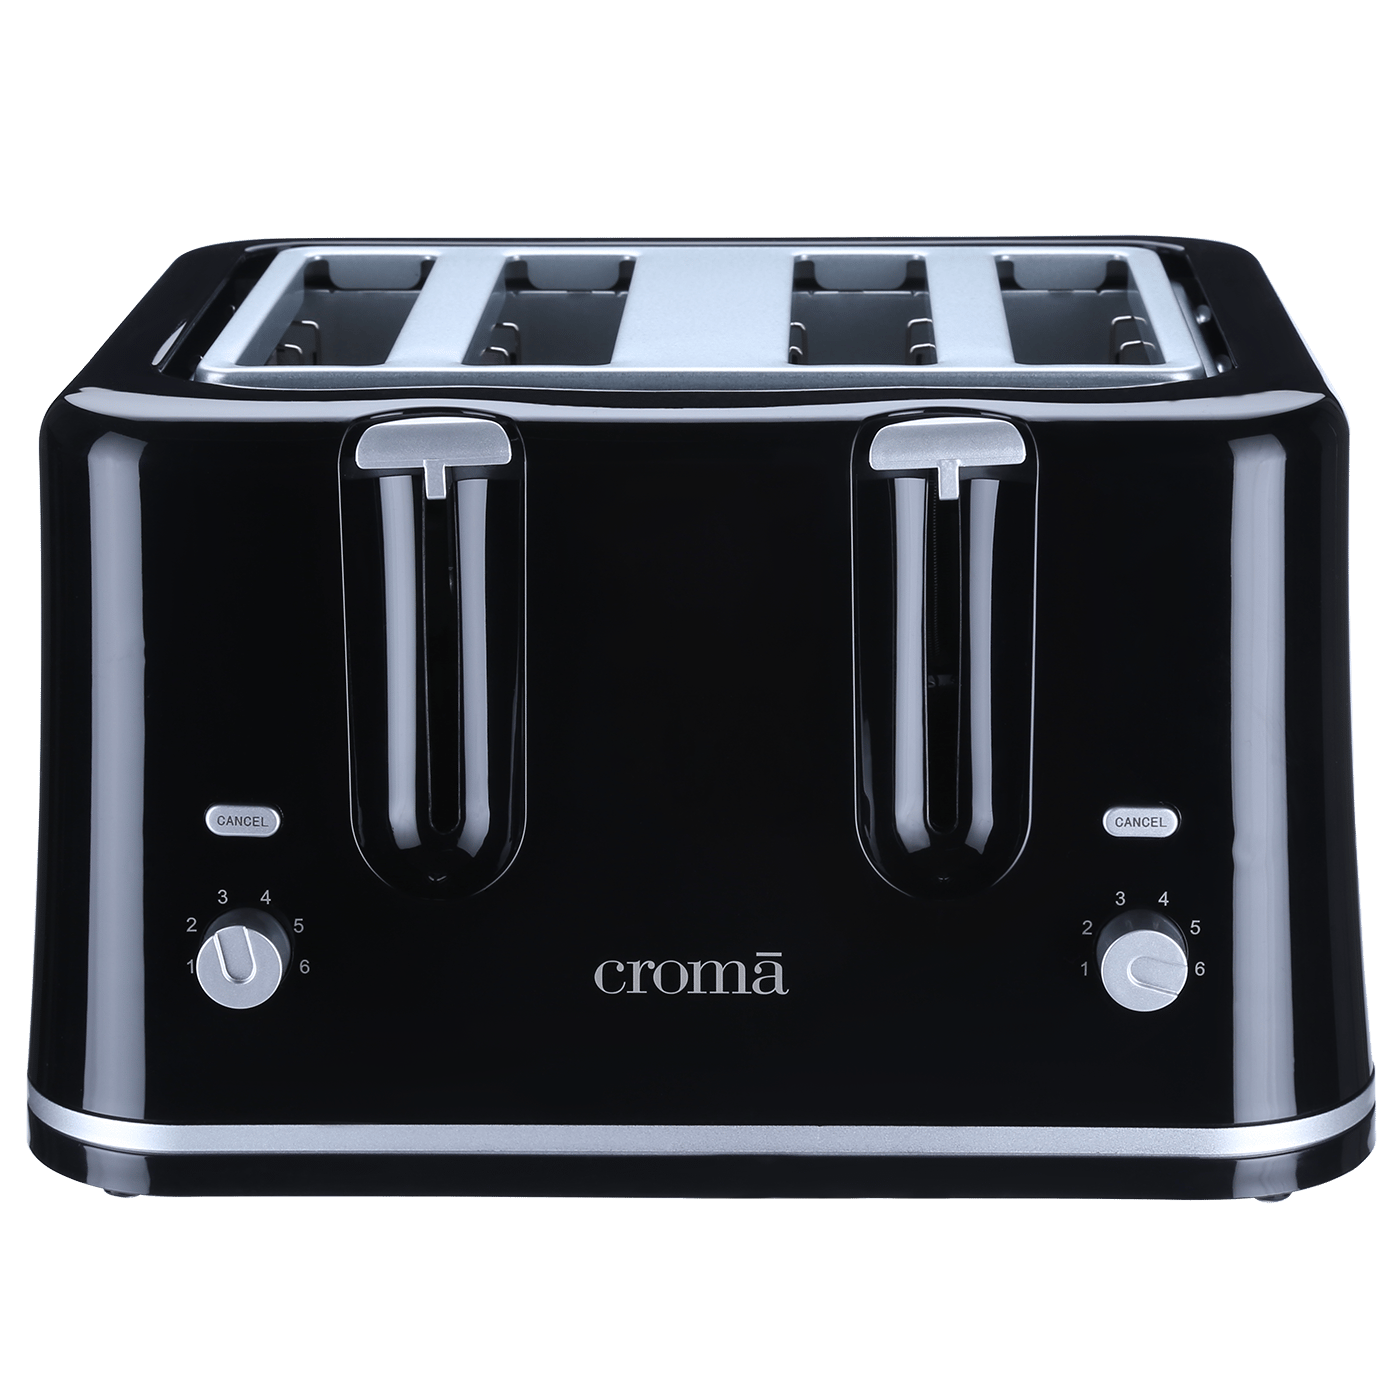 Croma 1740W 4 Slice Pop-Up Toaster with Removable Crumb Tray (Black)